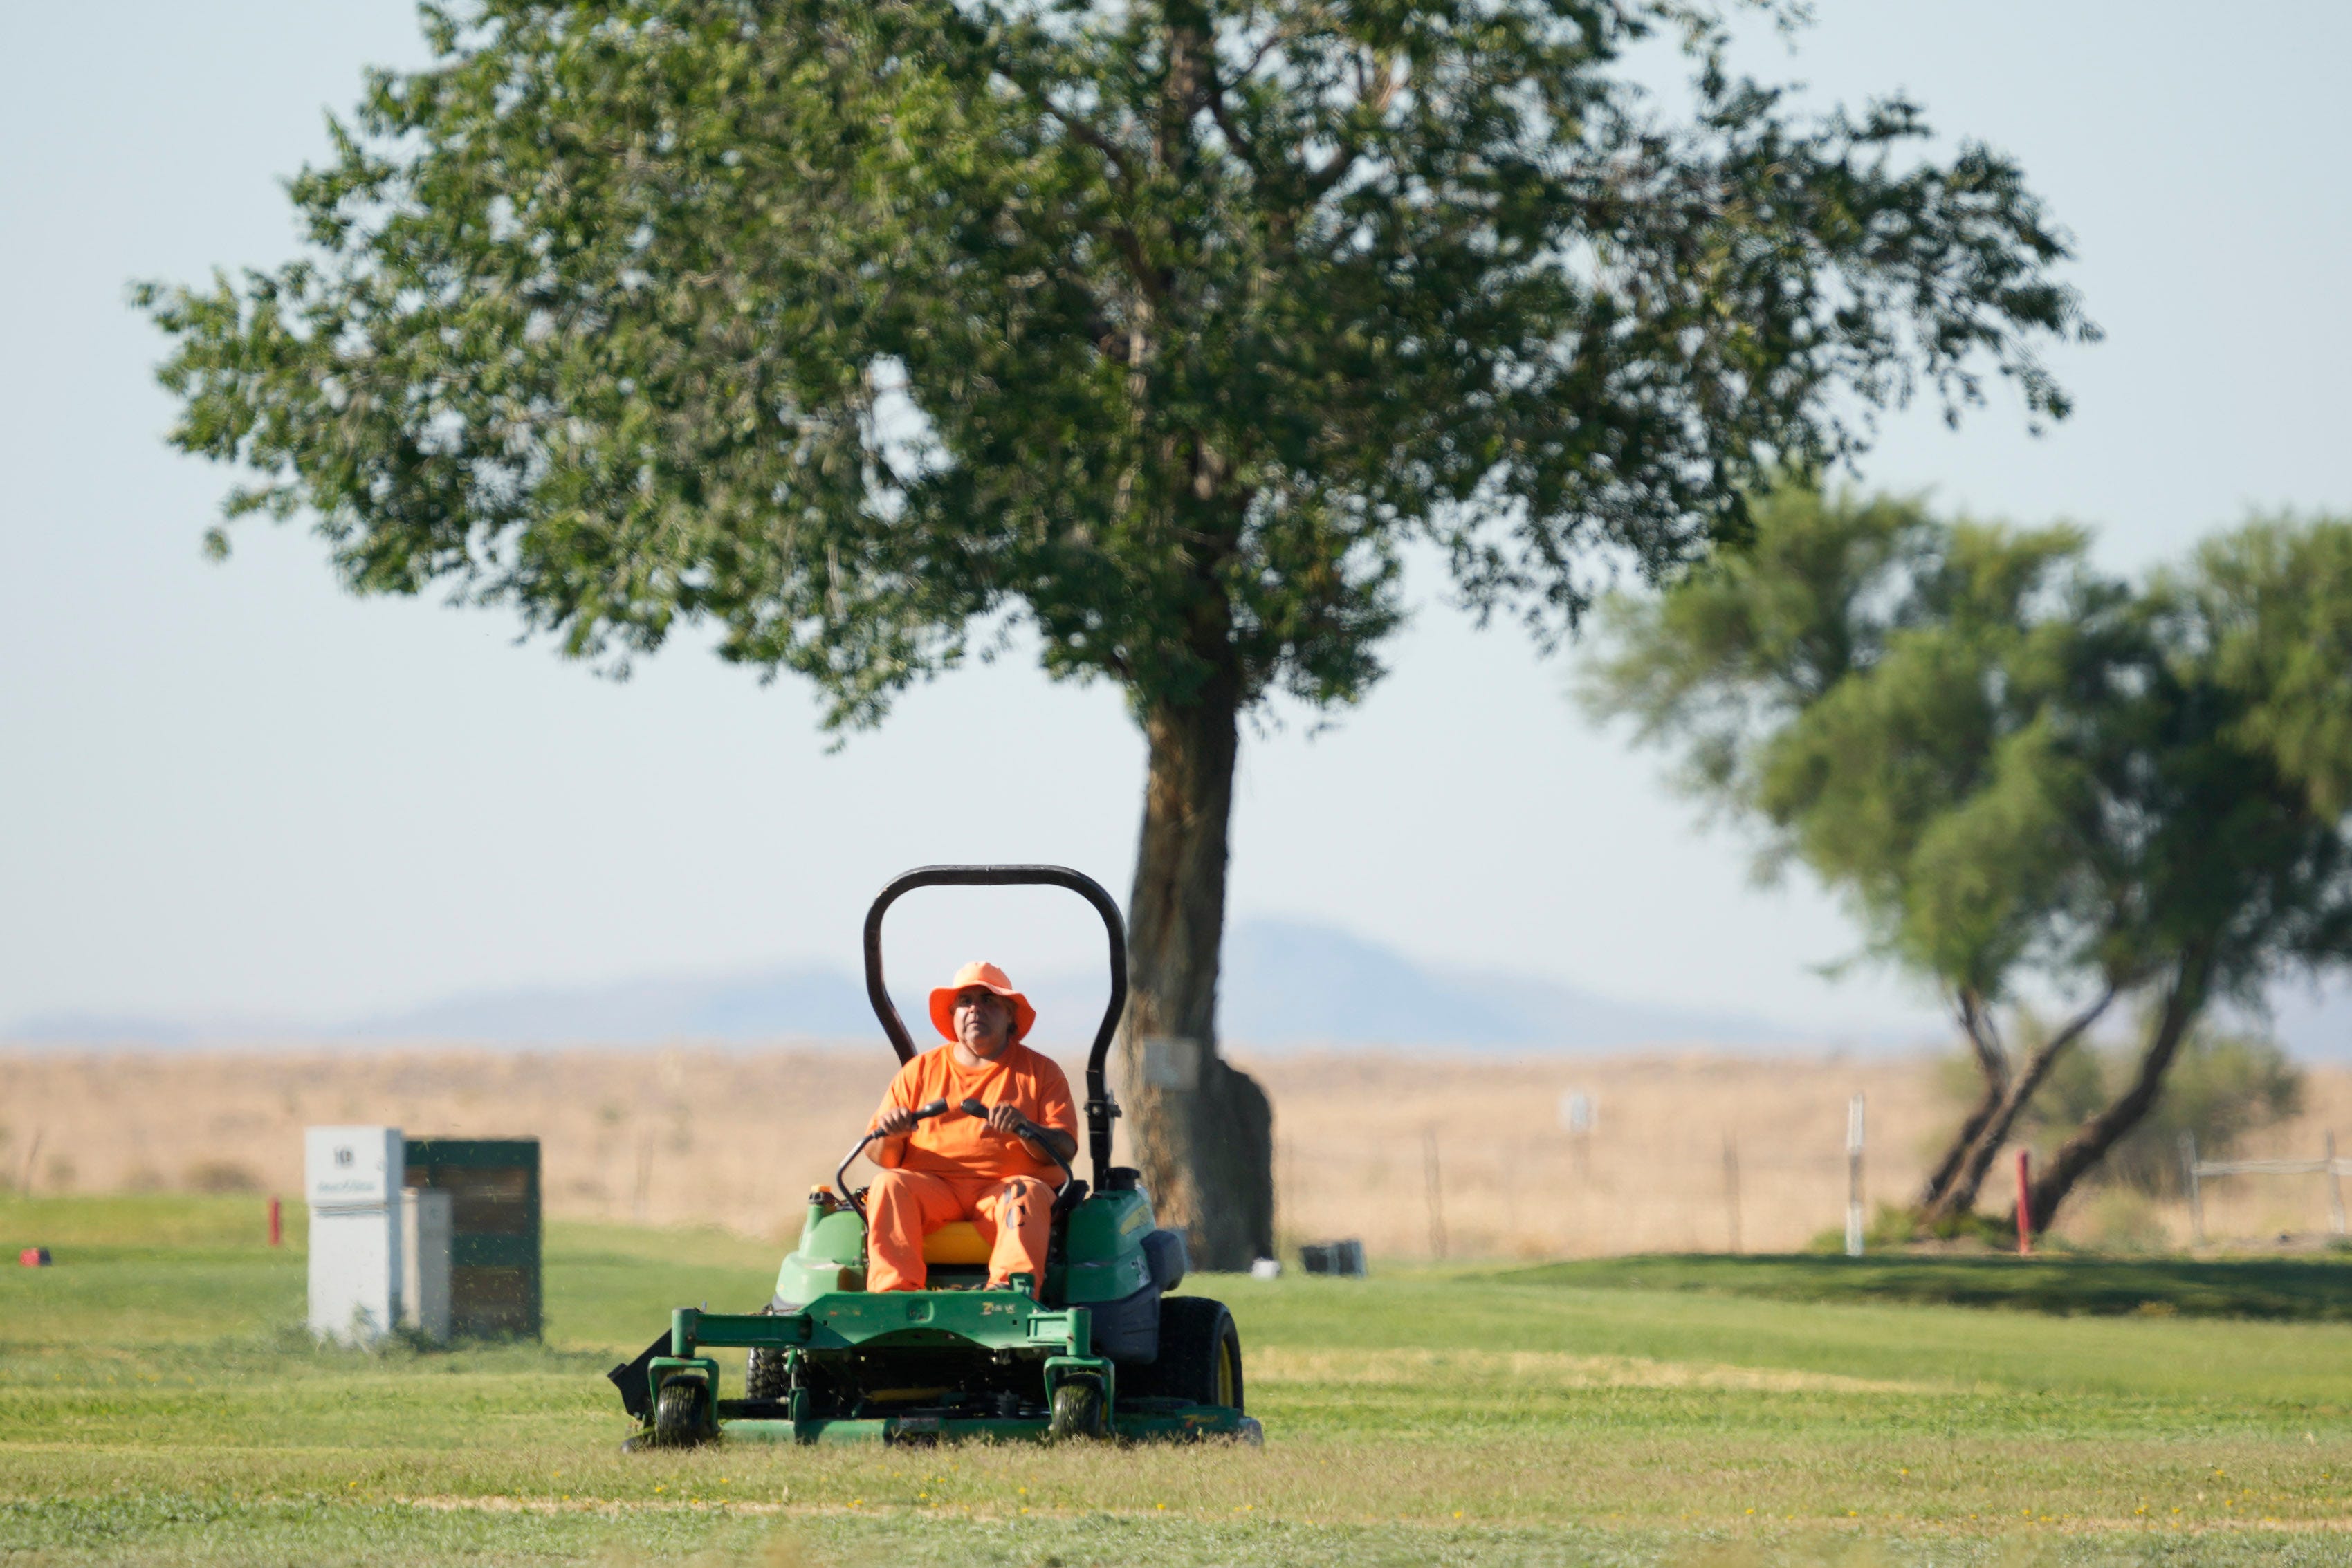 A prisoner mows the lawn at the Twin Lakes Municipal Golf Course in Willcox.